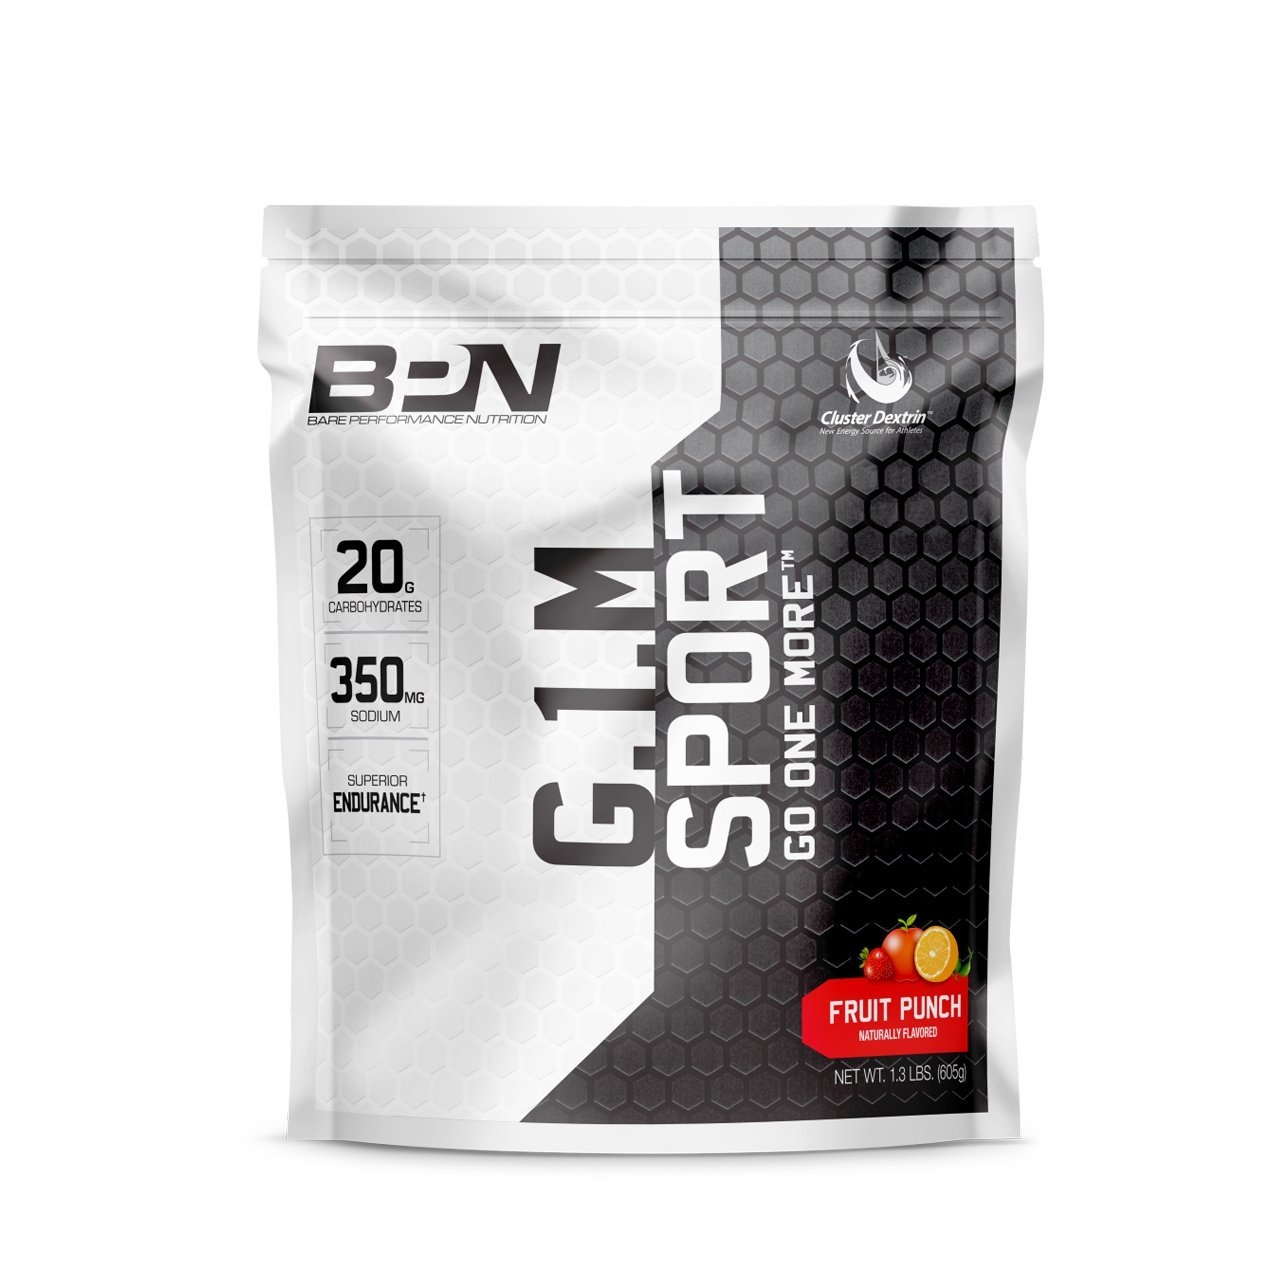 Bare Performance Nutrition – G.1.M Sport – Intra-Workout – Professional Supplements & Protein From A-list Nutrition